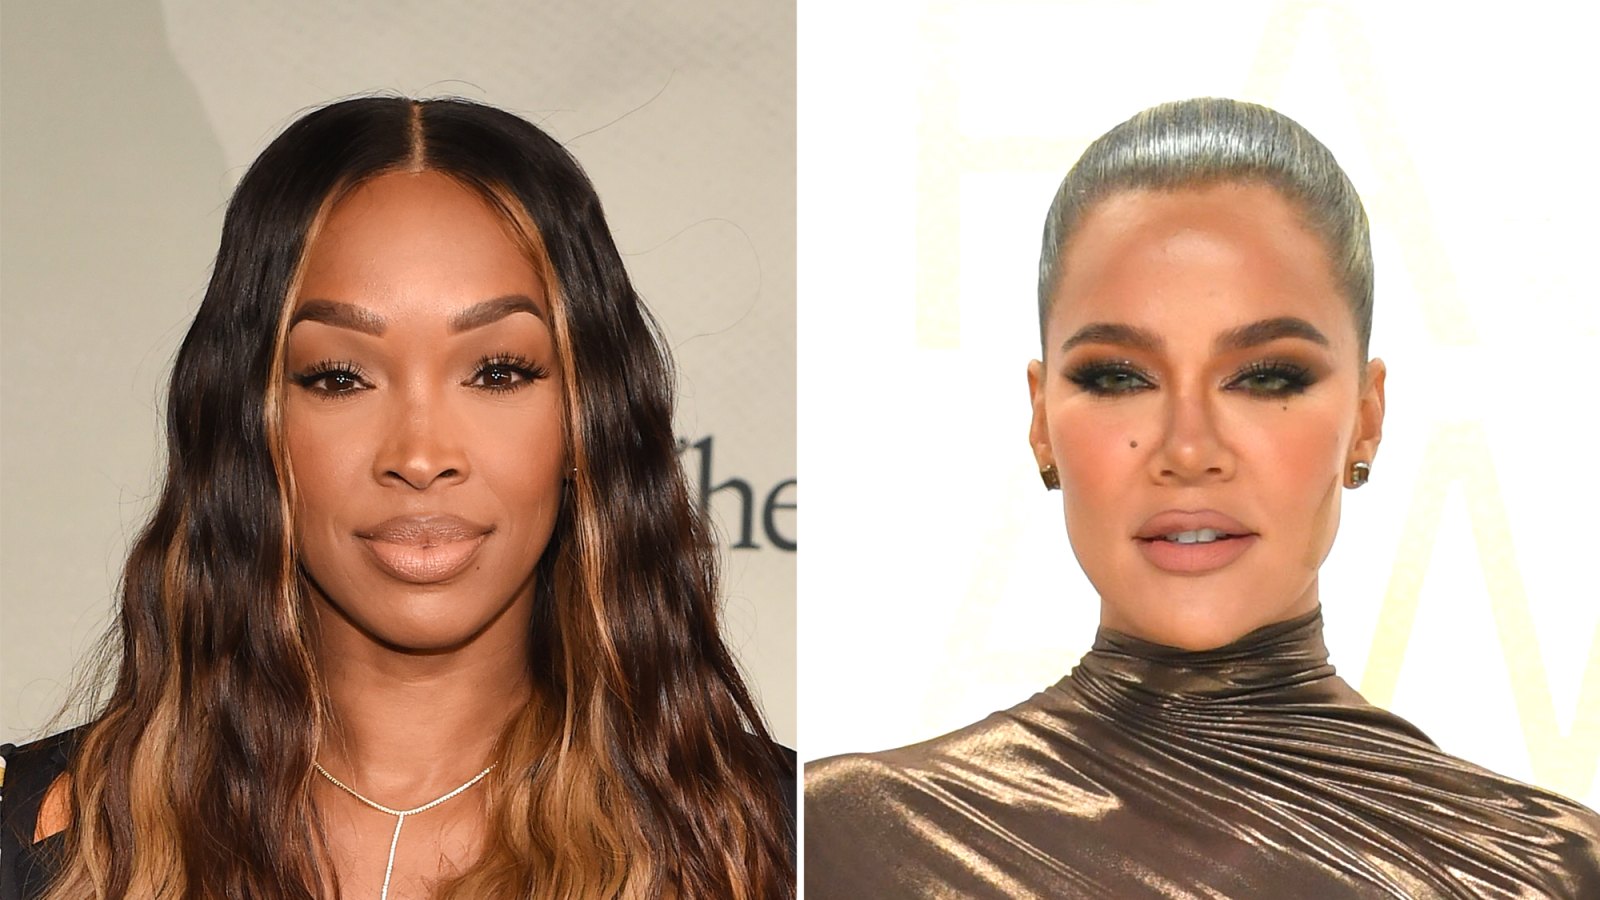 Malika Haqq Celebrates Khloe-s Healing After Discussing Personal Challenges